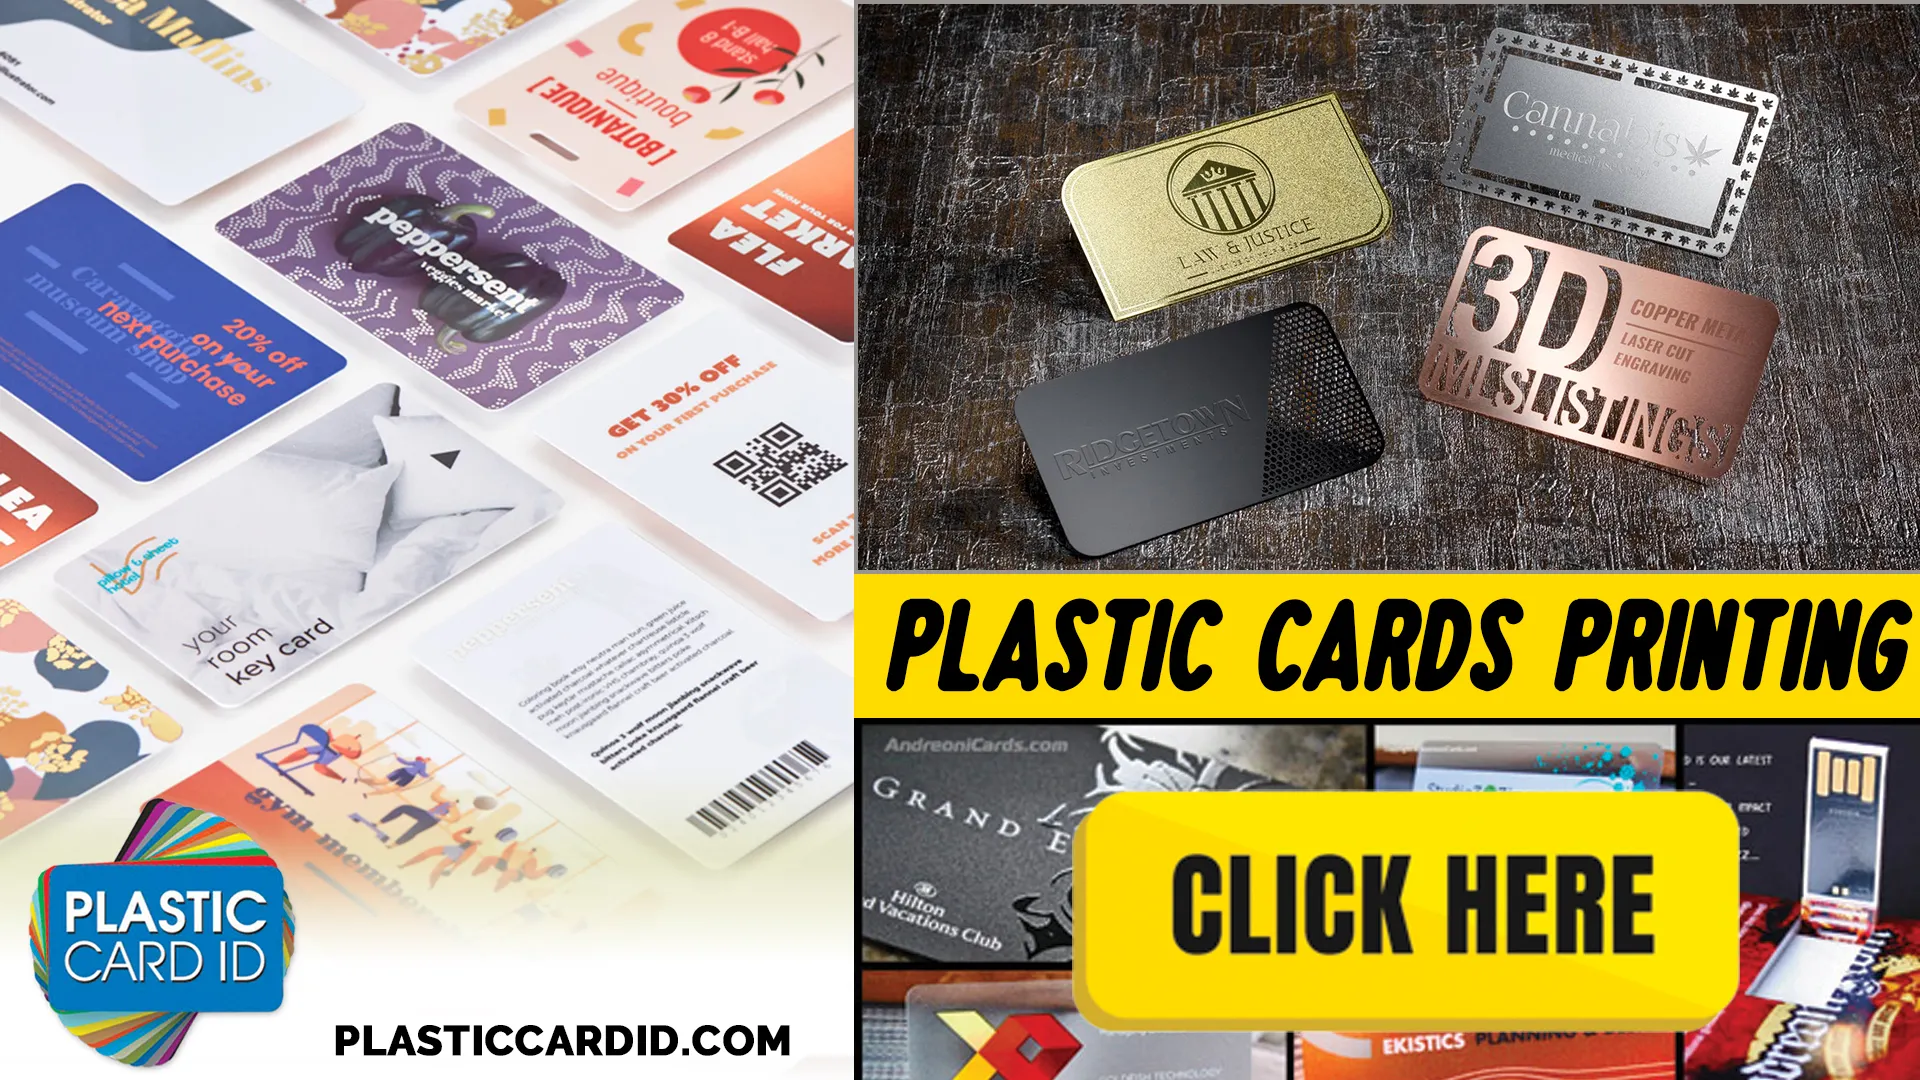 Benefits of Eco-Friendly Plastic Cards for Businesses